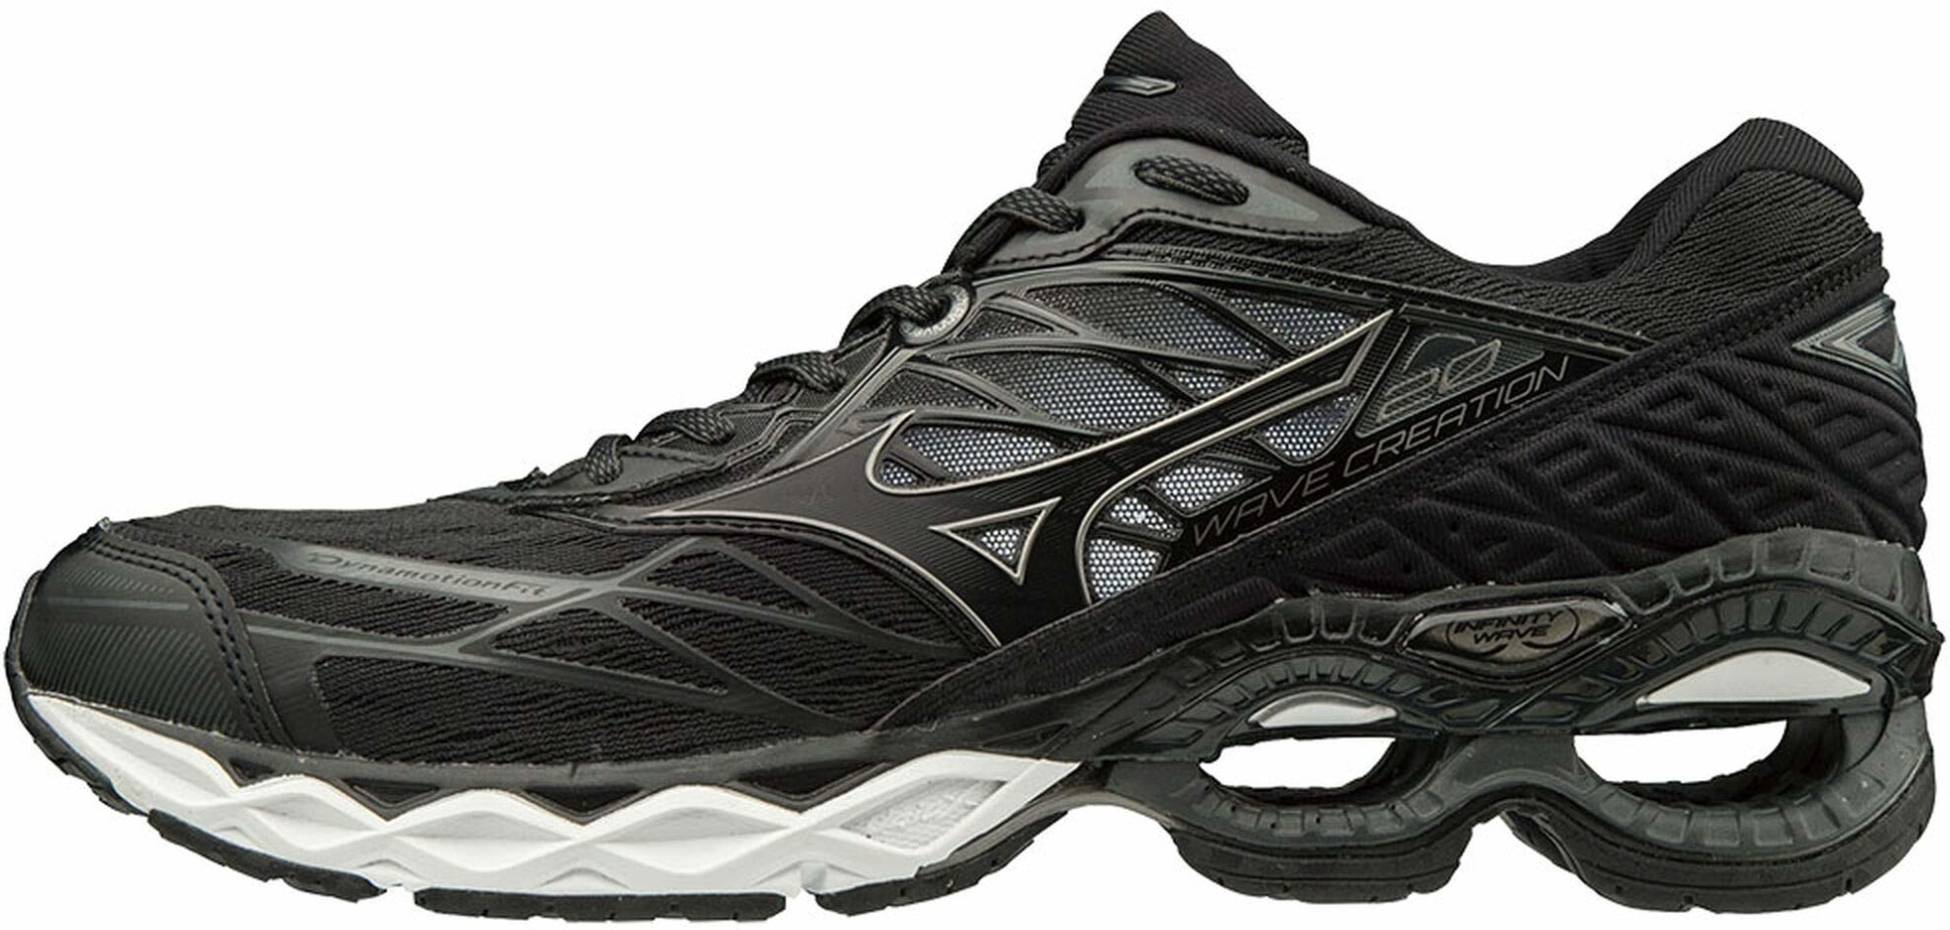 Save 49% on Mizuno Road Running Shoes 